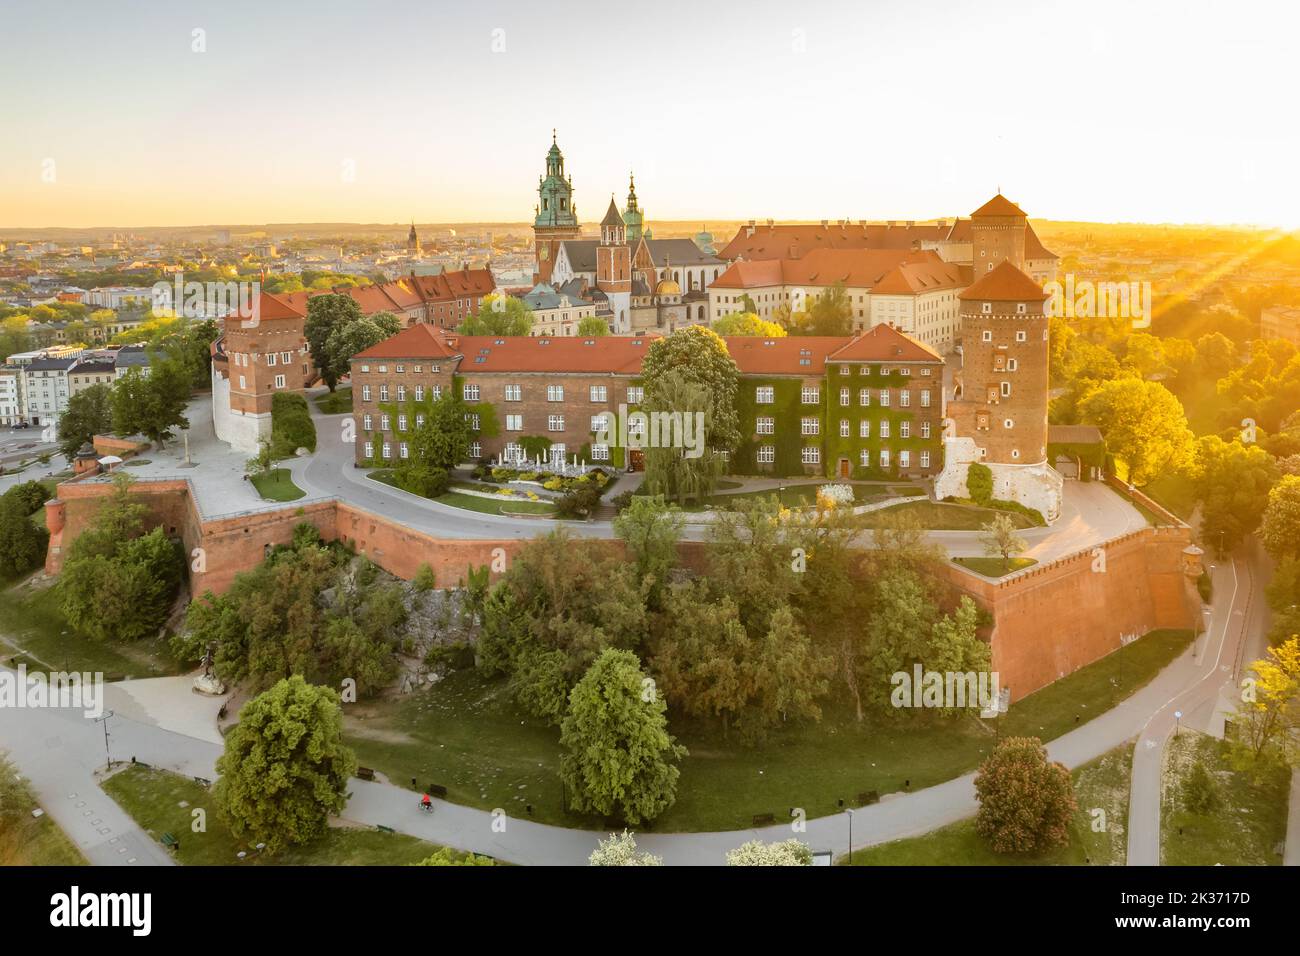 Historic royal Wawel castle in Cracow at sunrise, Poland. Stock Photo